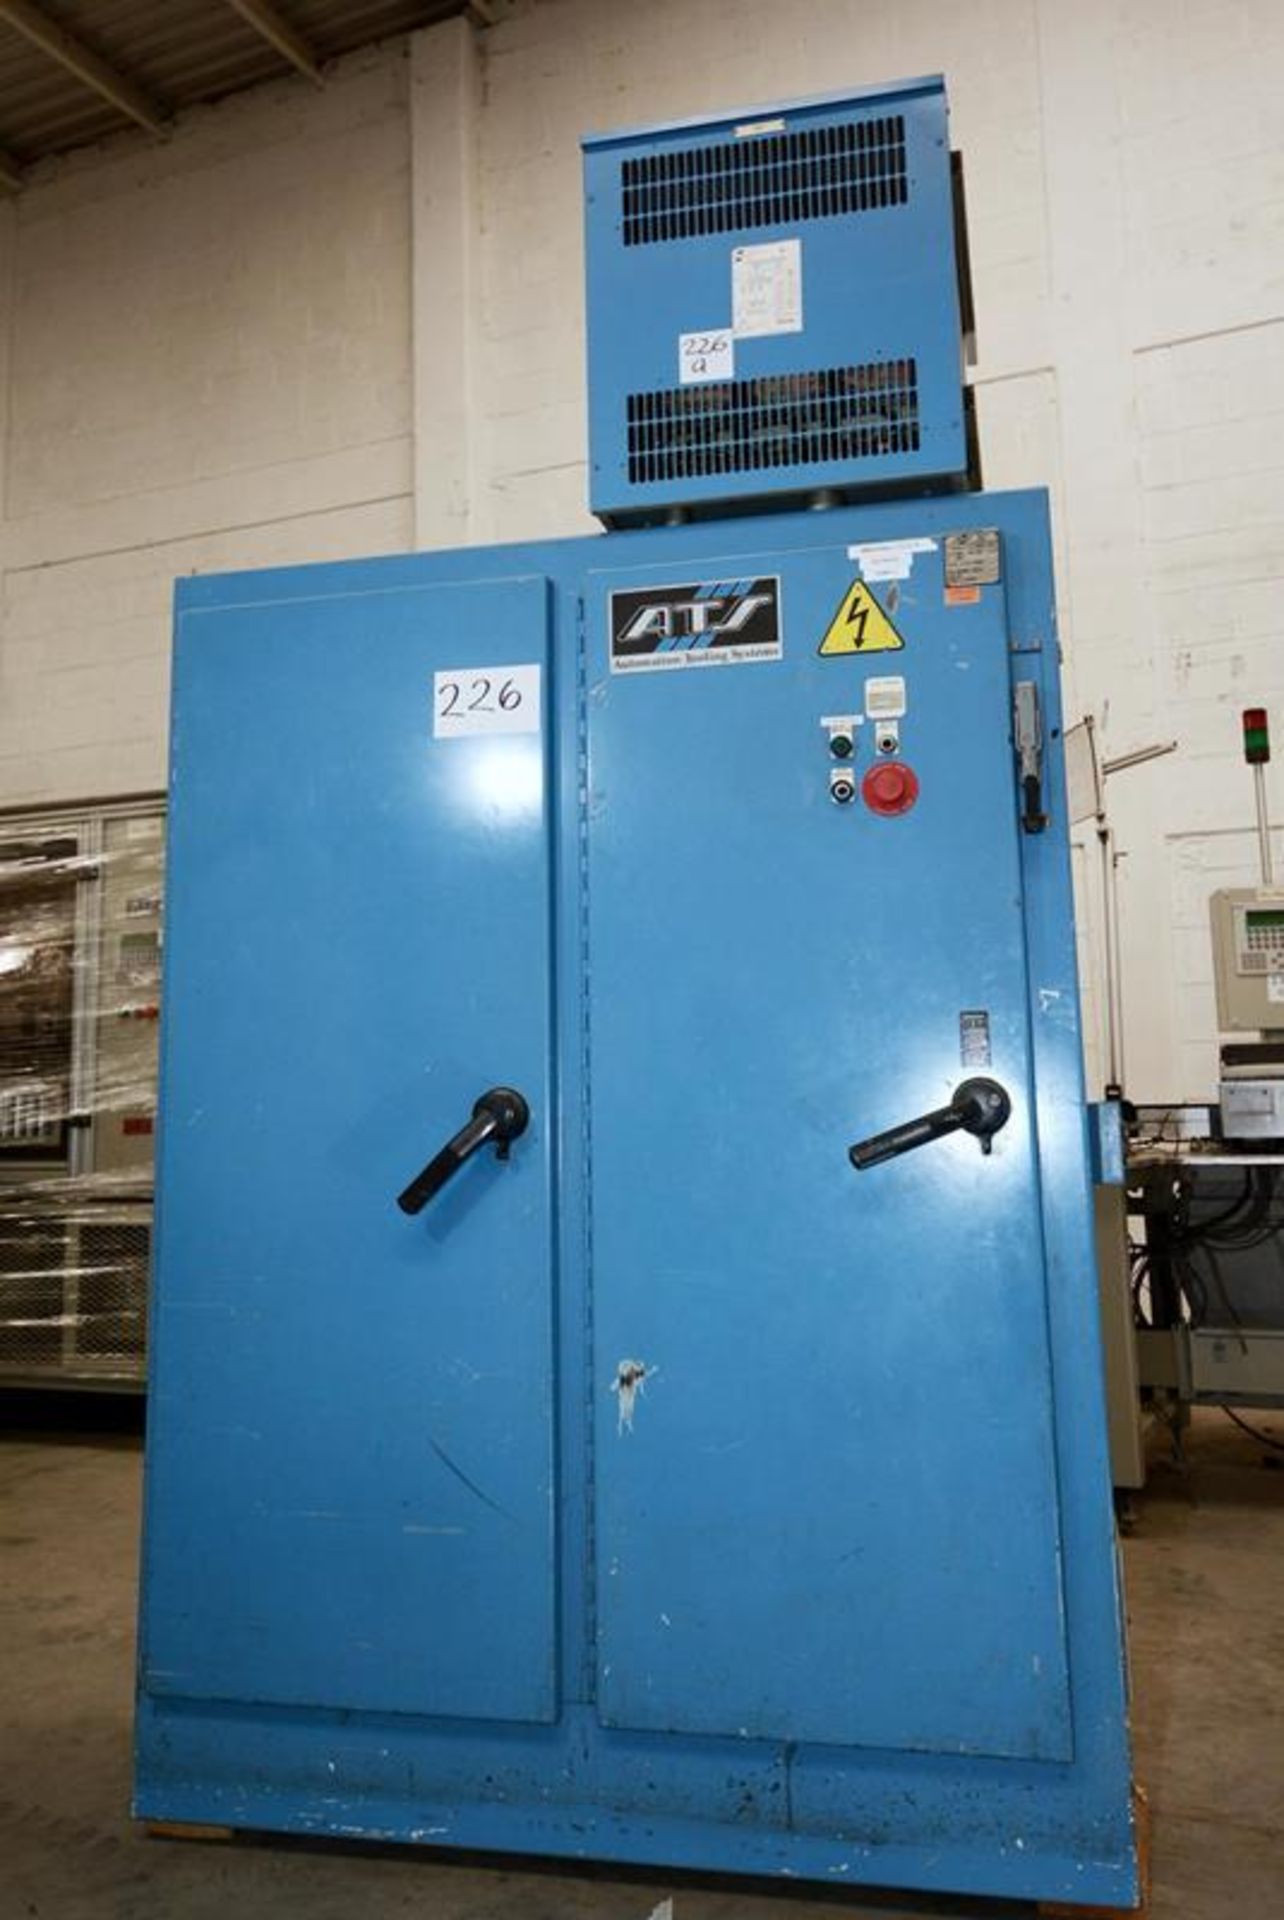 Equipment: Electrical panel. Brand: ATS. Model: A38693900. Year: N/A. Serial Number: N/A. ..